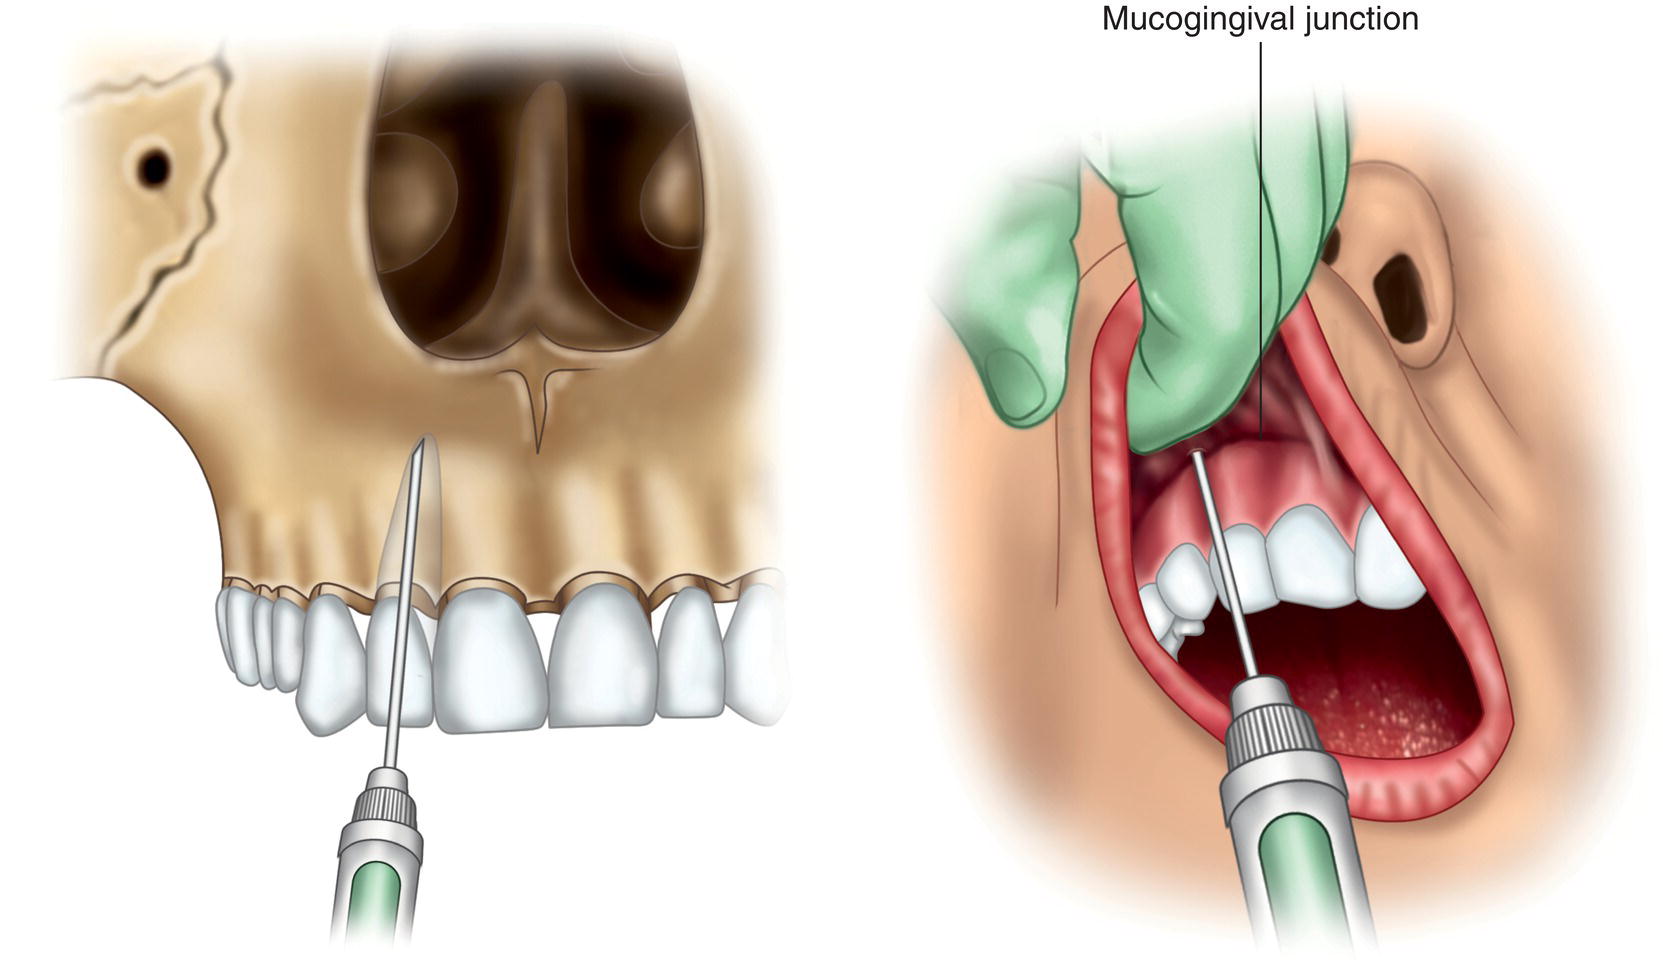 Two illustrations of the insertion of needle along the mucogingival junction in the anterior teeth of a skull and a human.